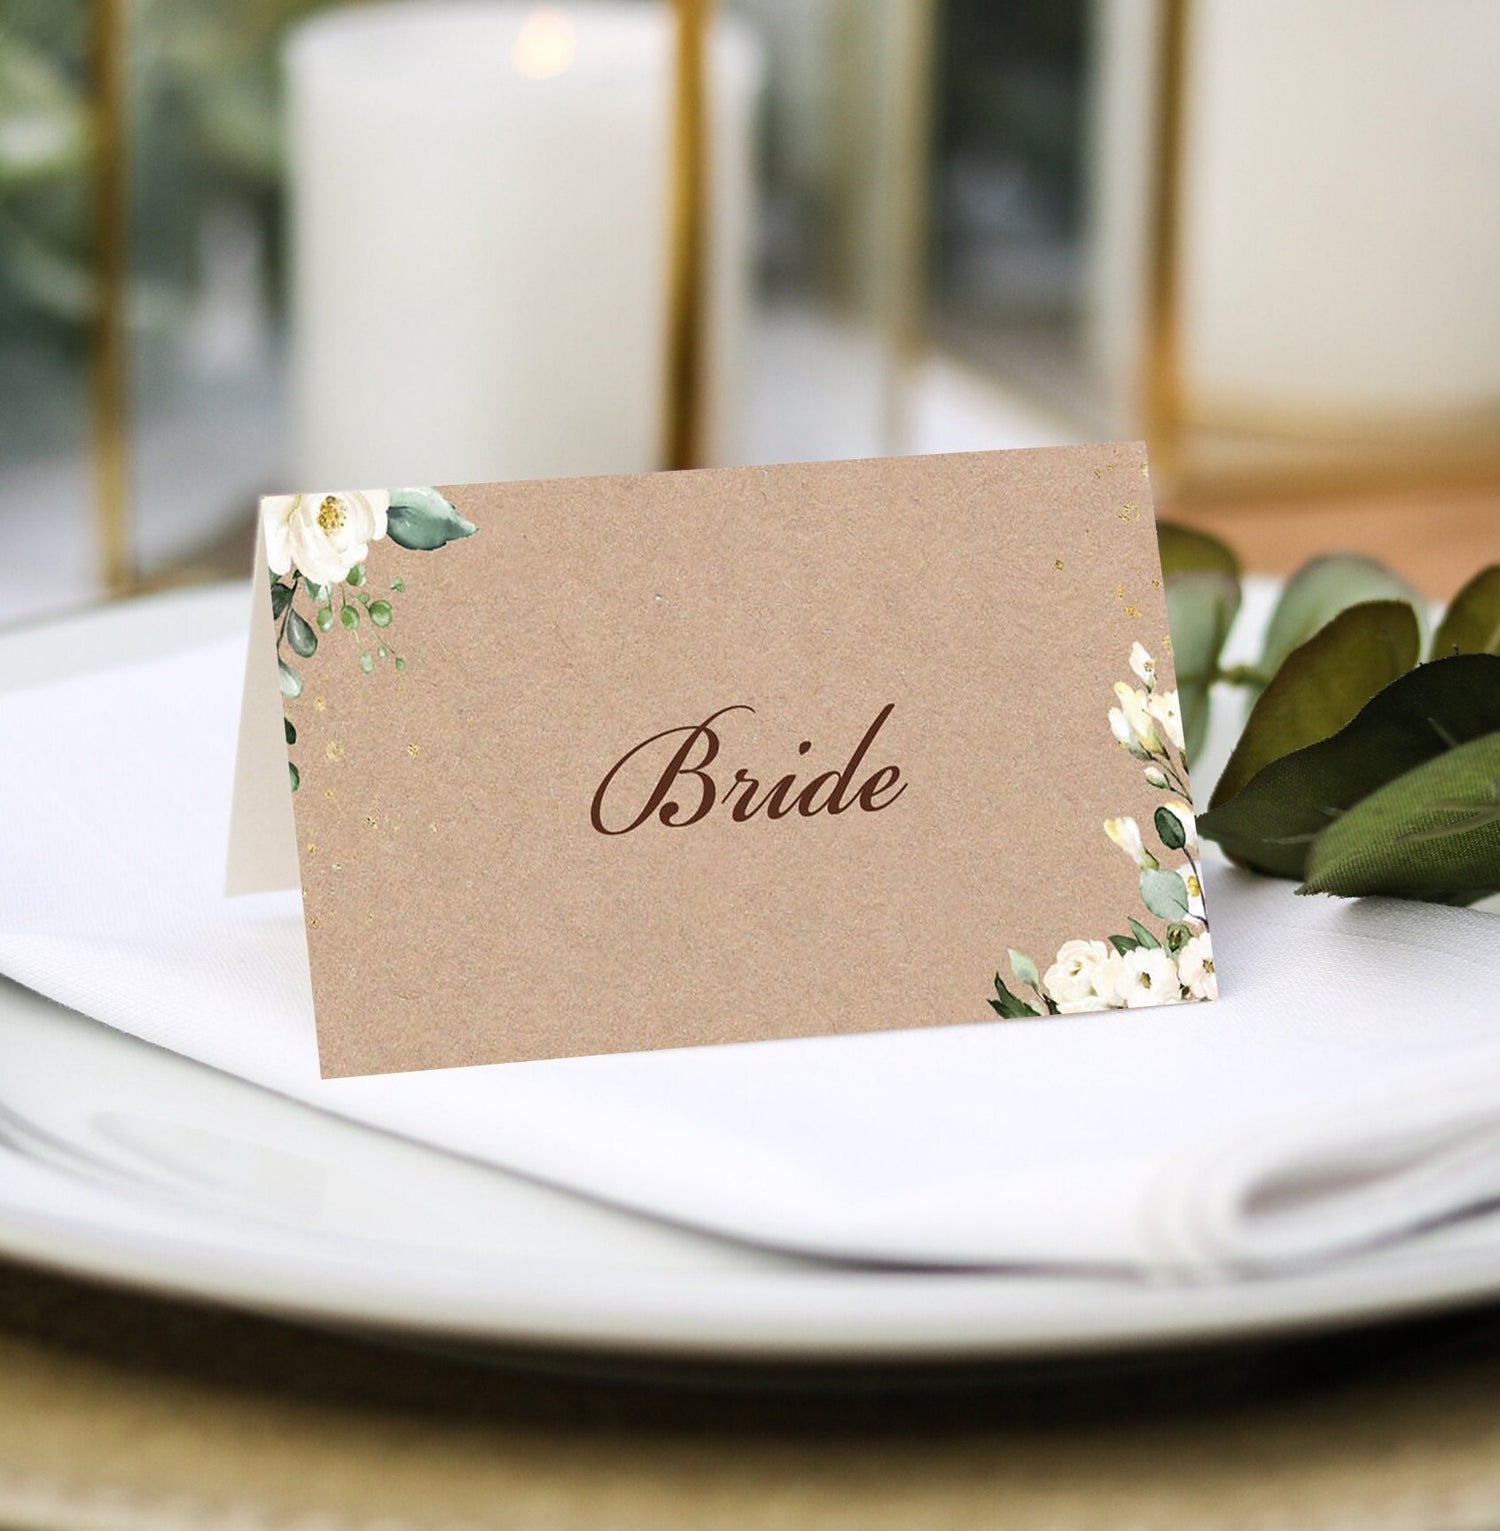 rustic place cards with guest names and menu choices